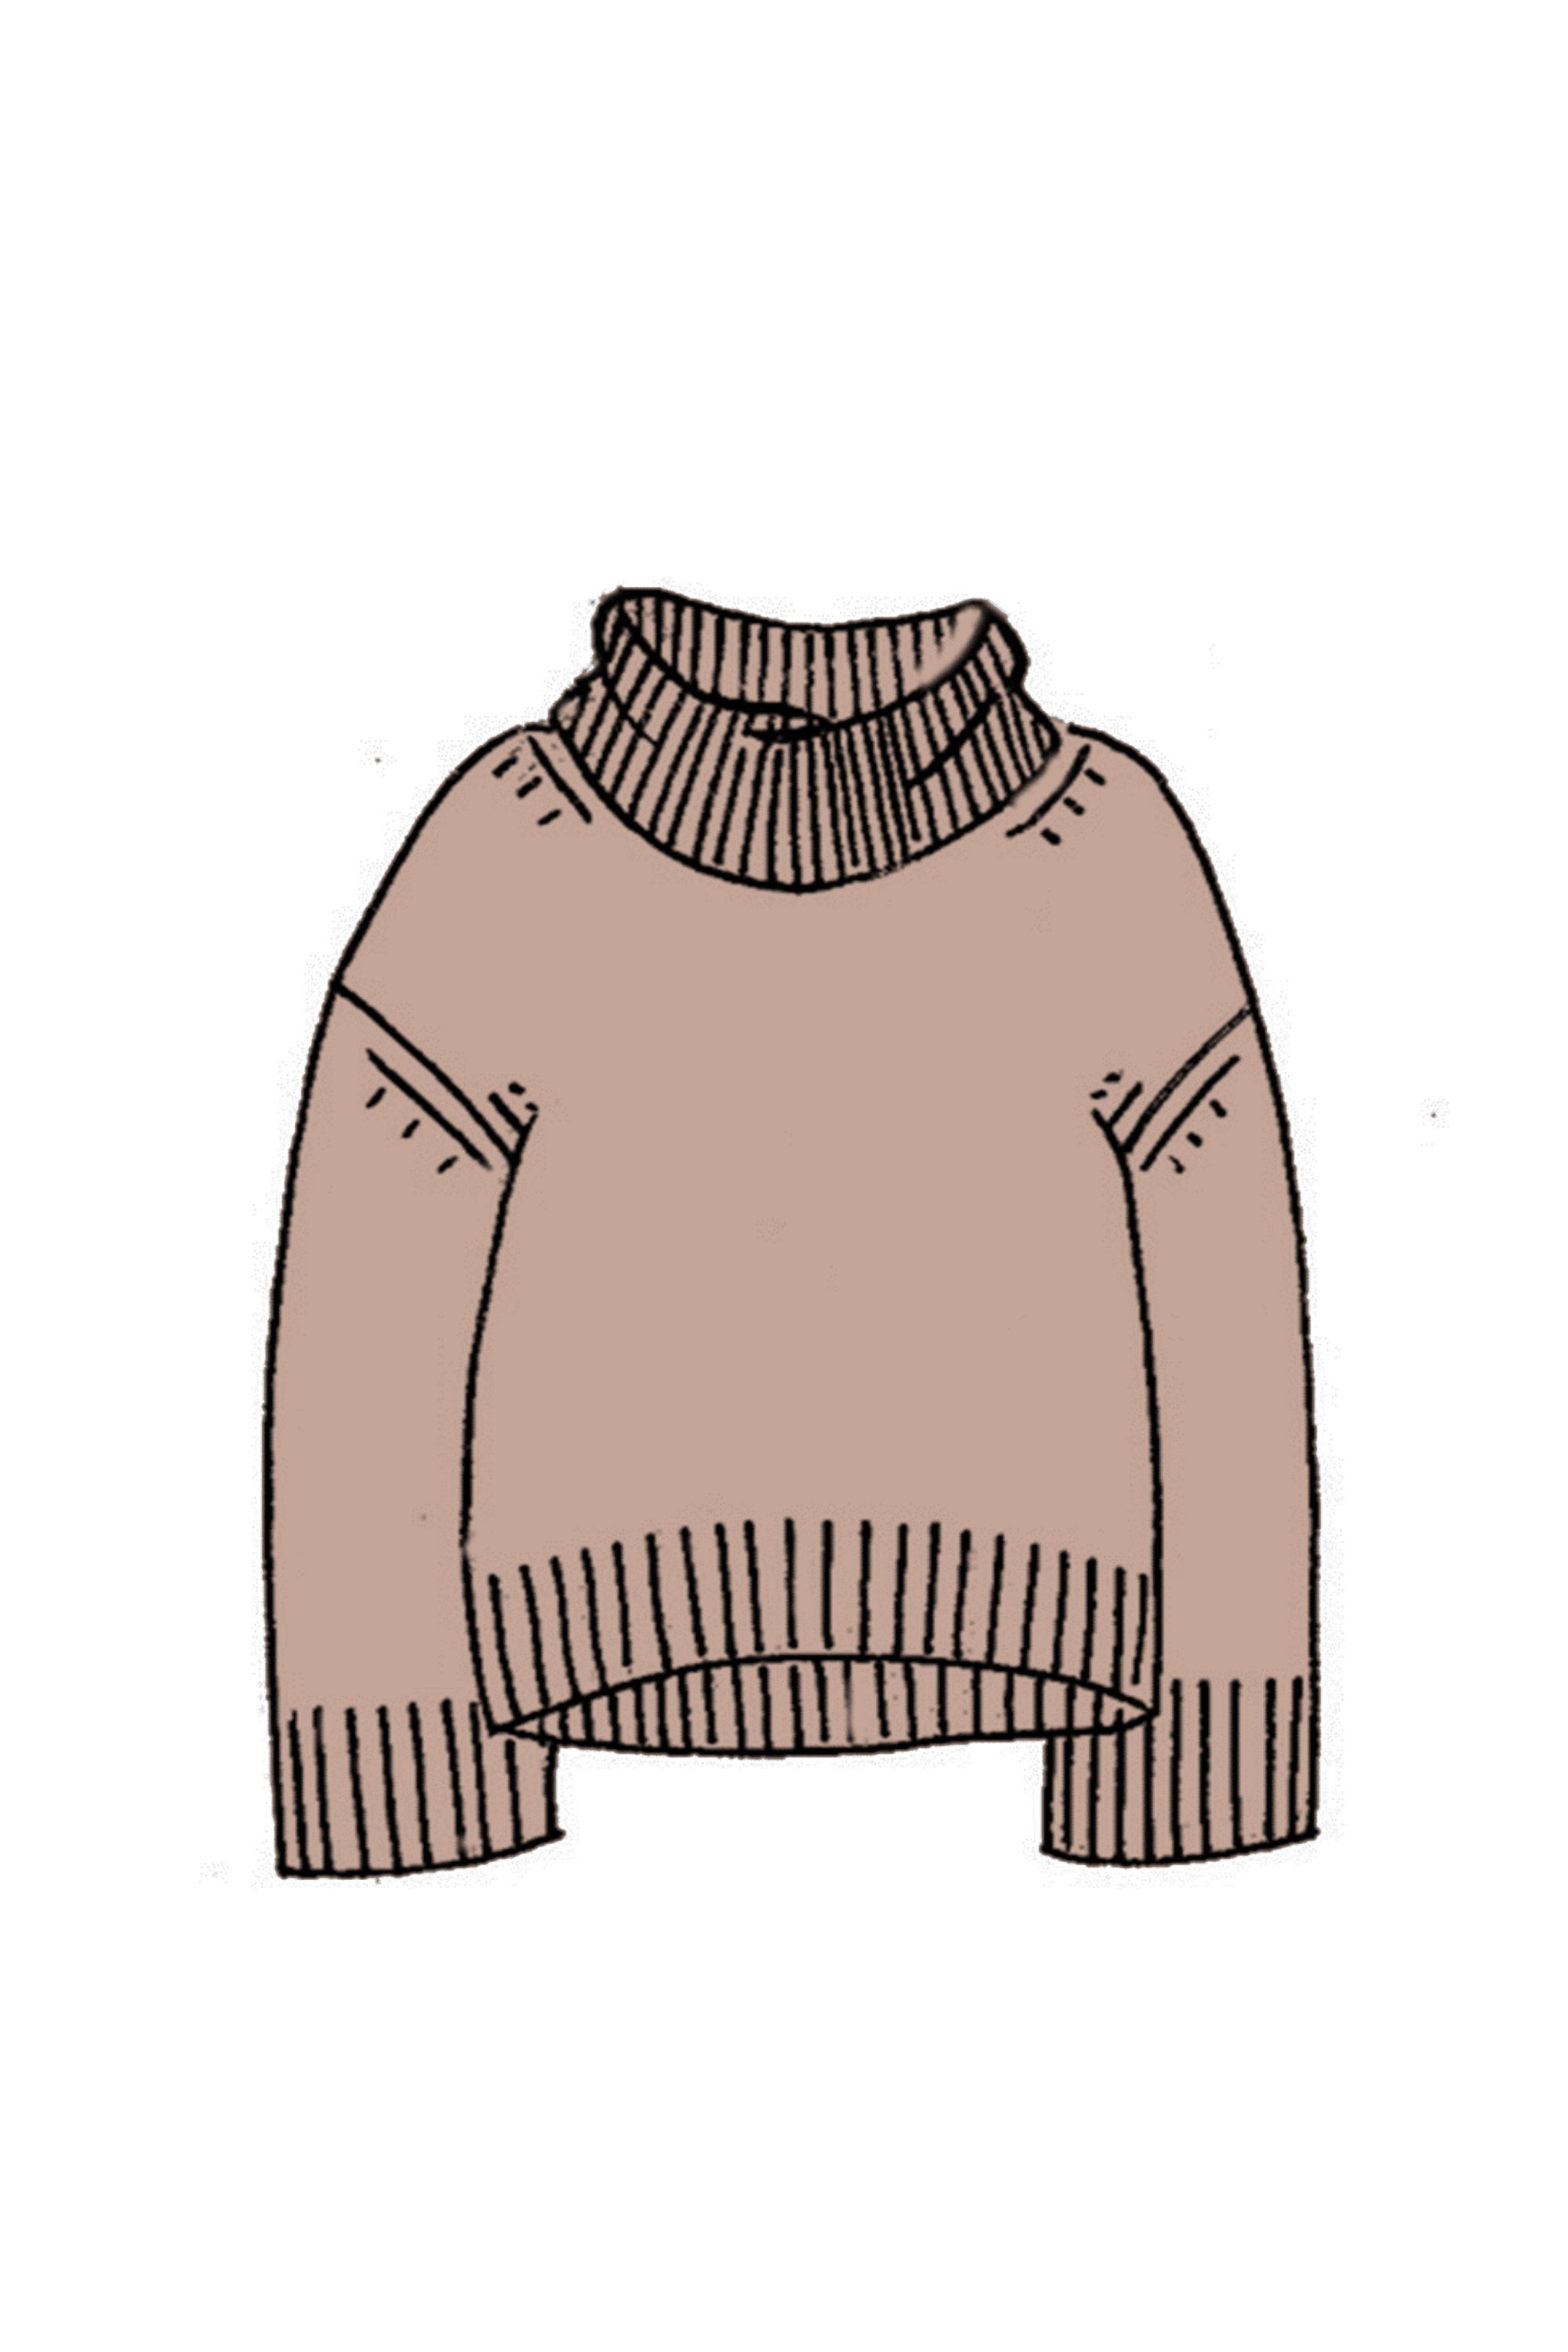 Chunky Cashmere Cowl Neck Sweater - Made to Order